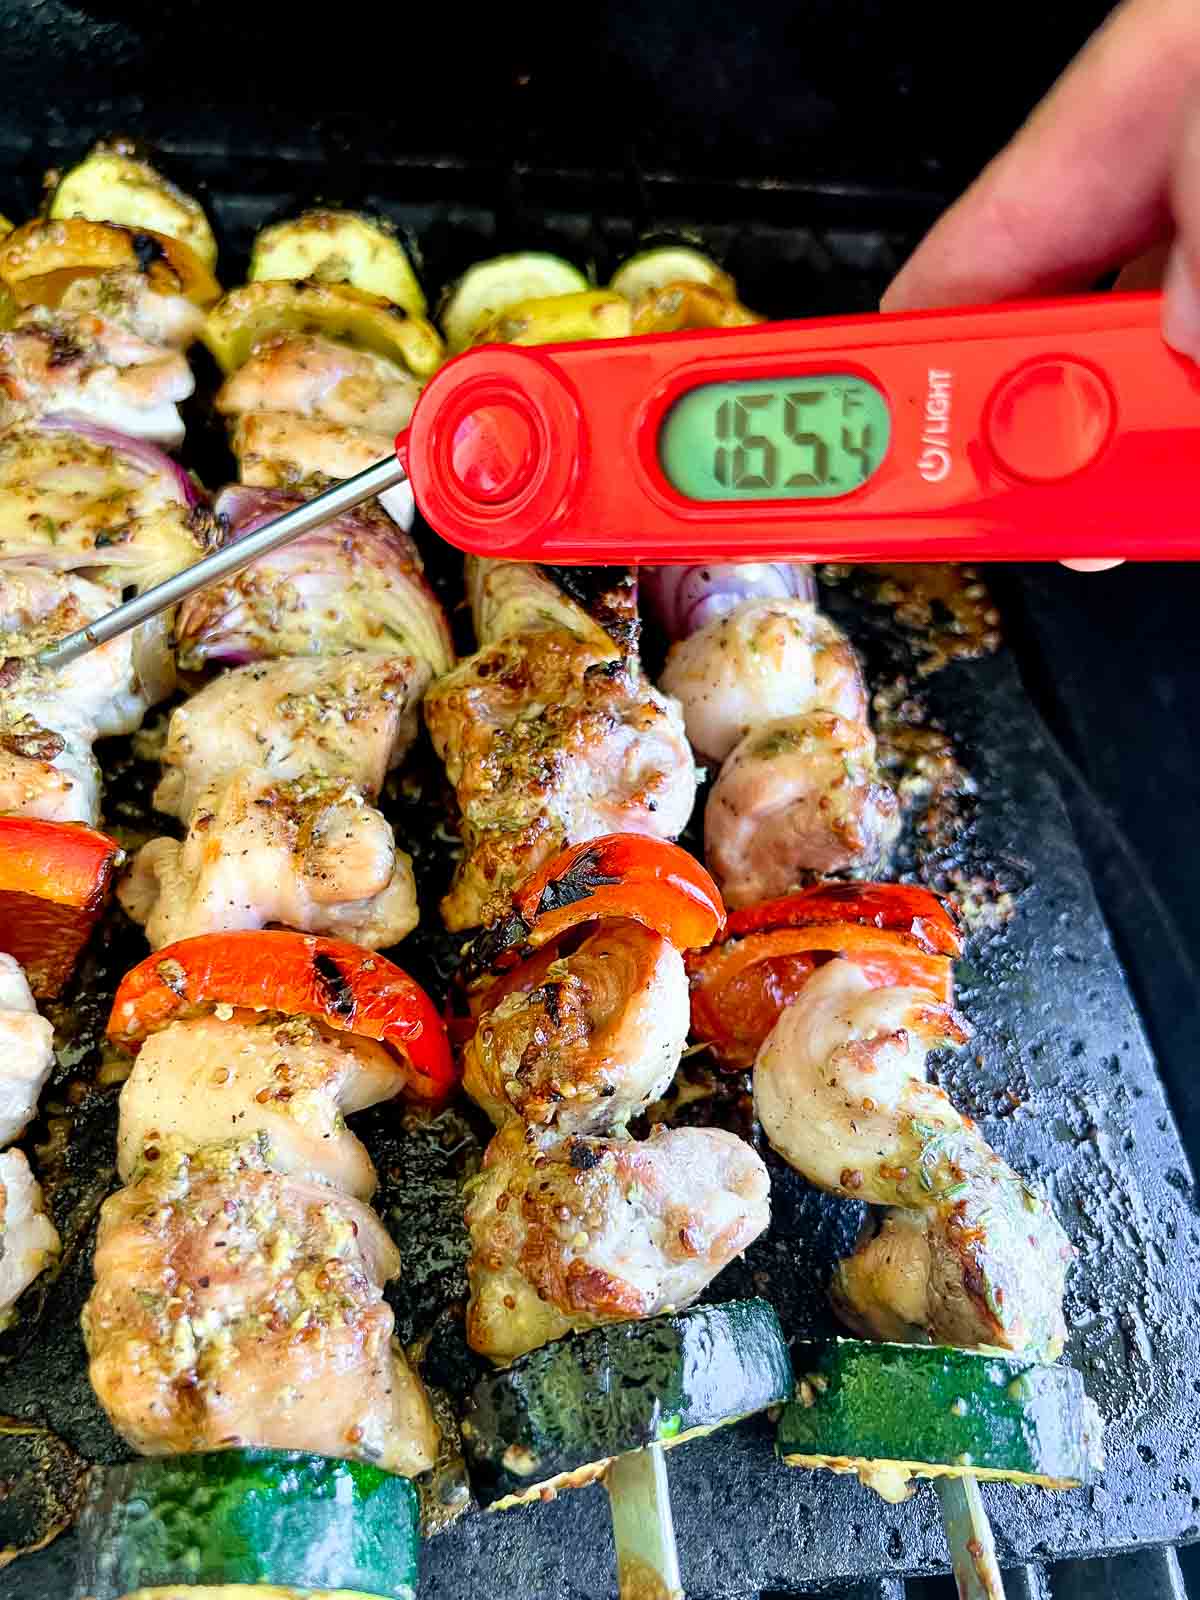 Chicken kabobs cooked to 165°F.